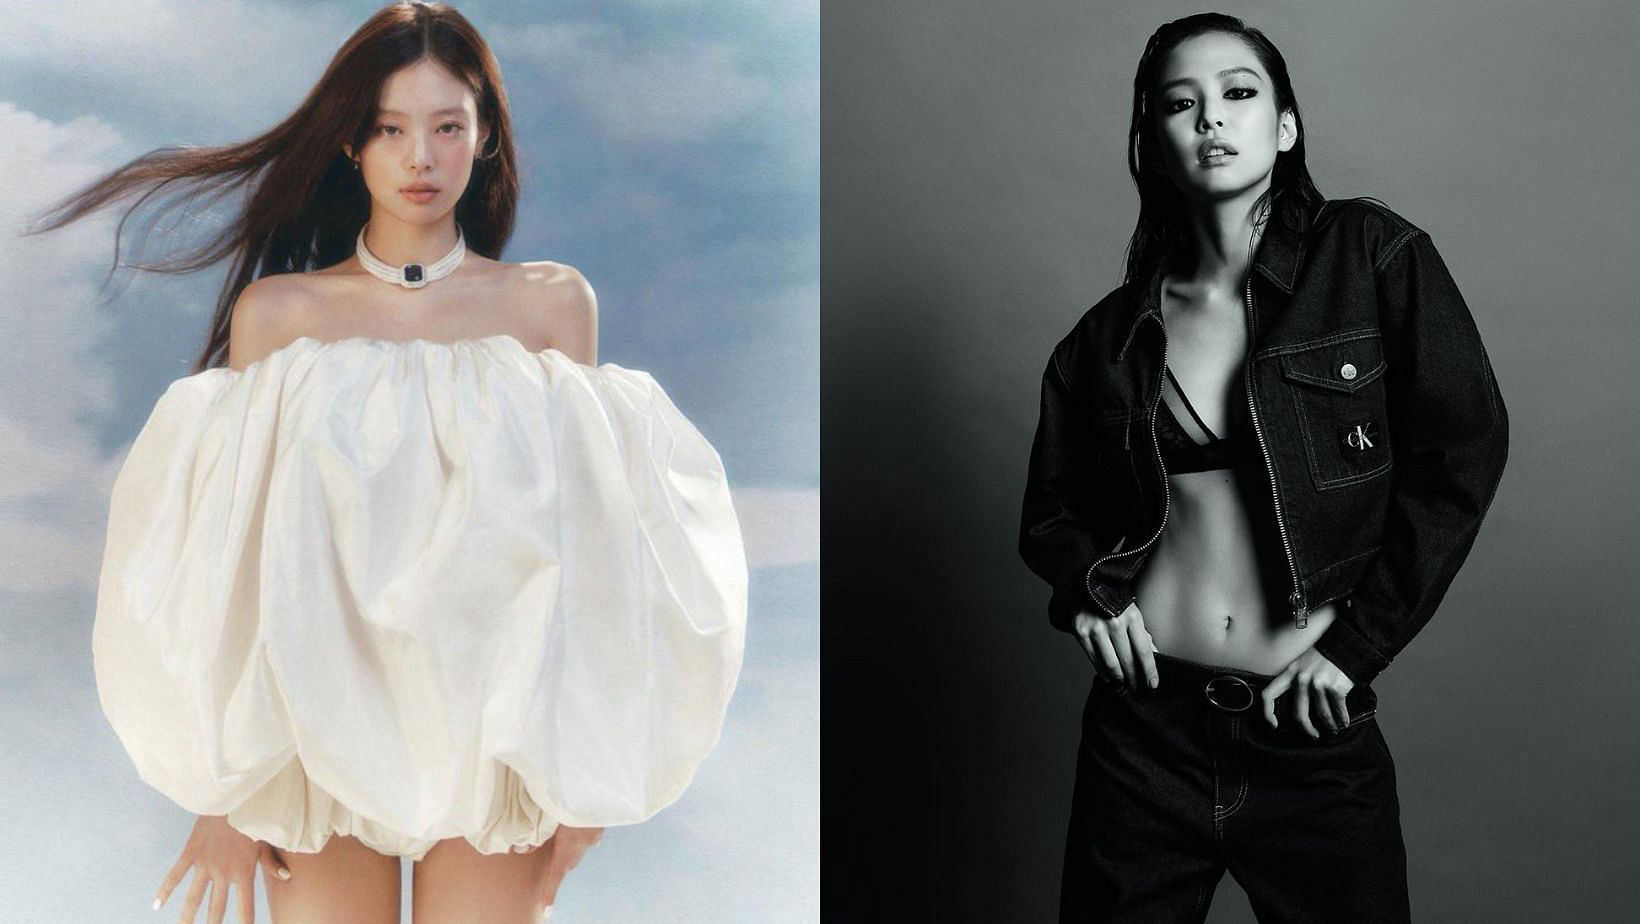 Viral Takes on X: According to a new report, one Instagram post by Jennie  is worth 2.8 billion won and Calvin Klein earned $68 million USD through  their collaboration campaign with the